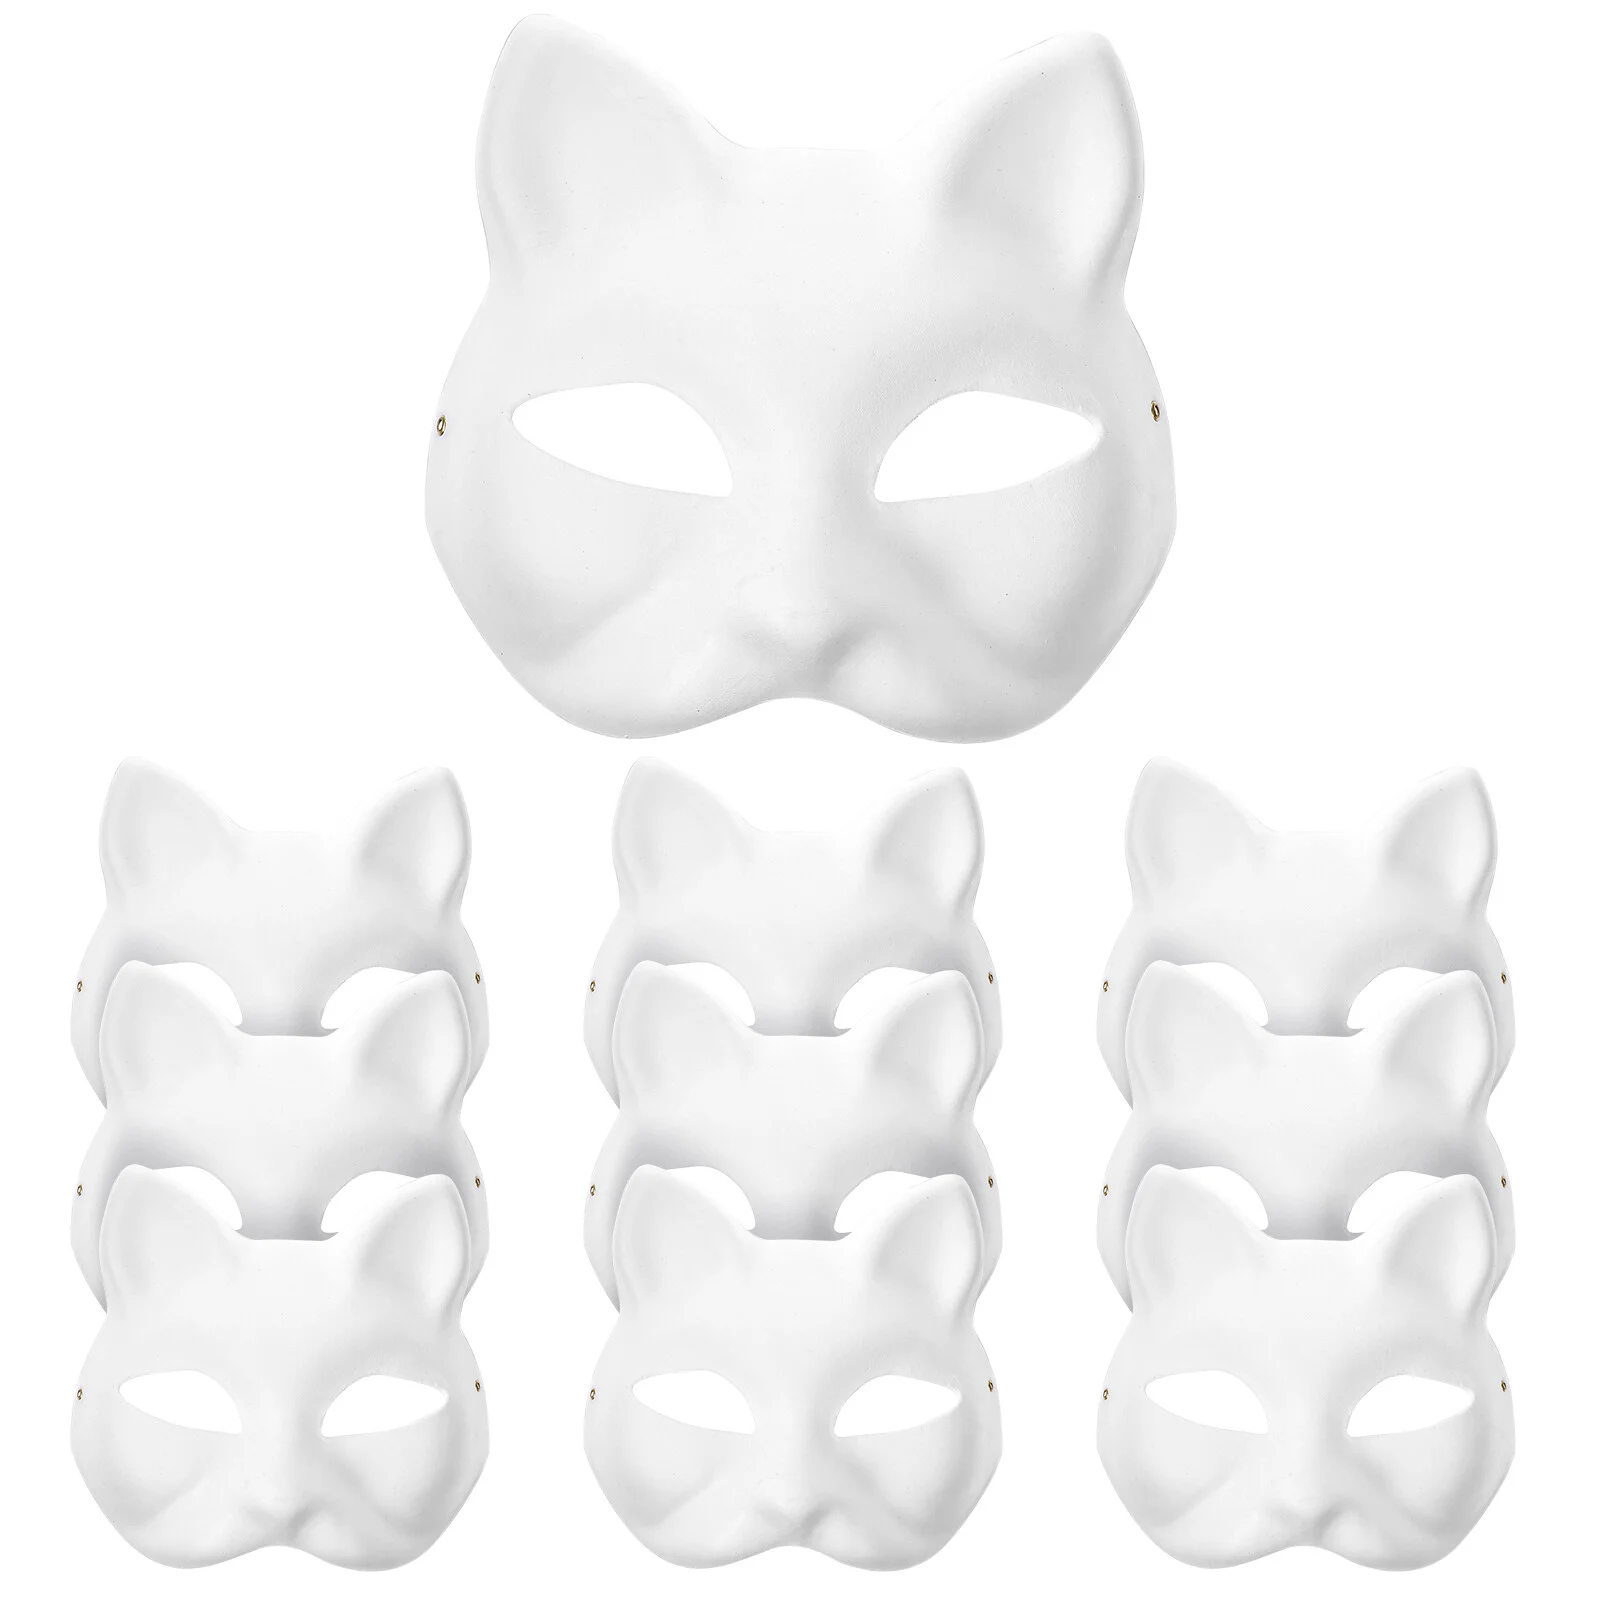 

Masks Cat Mask Masquerade Diy White Blank Face Cosplay Halloween Party Paper Unpainted Paintable Animal Kids Half Decorate Mache